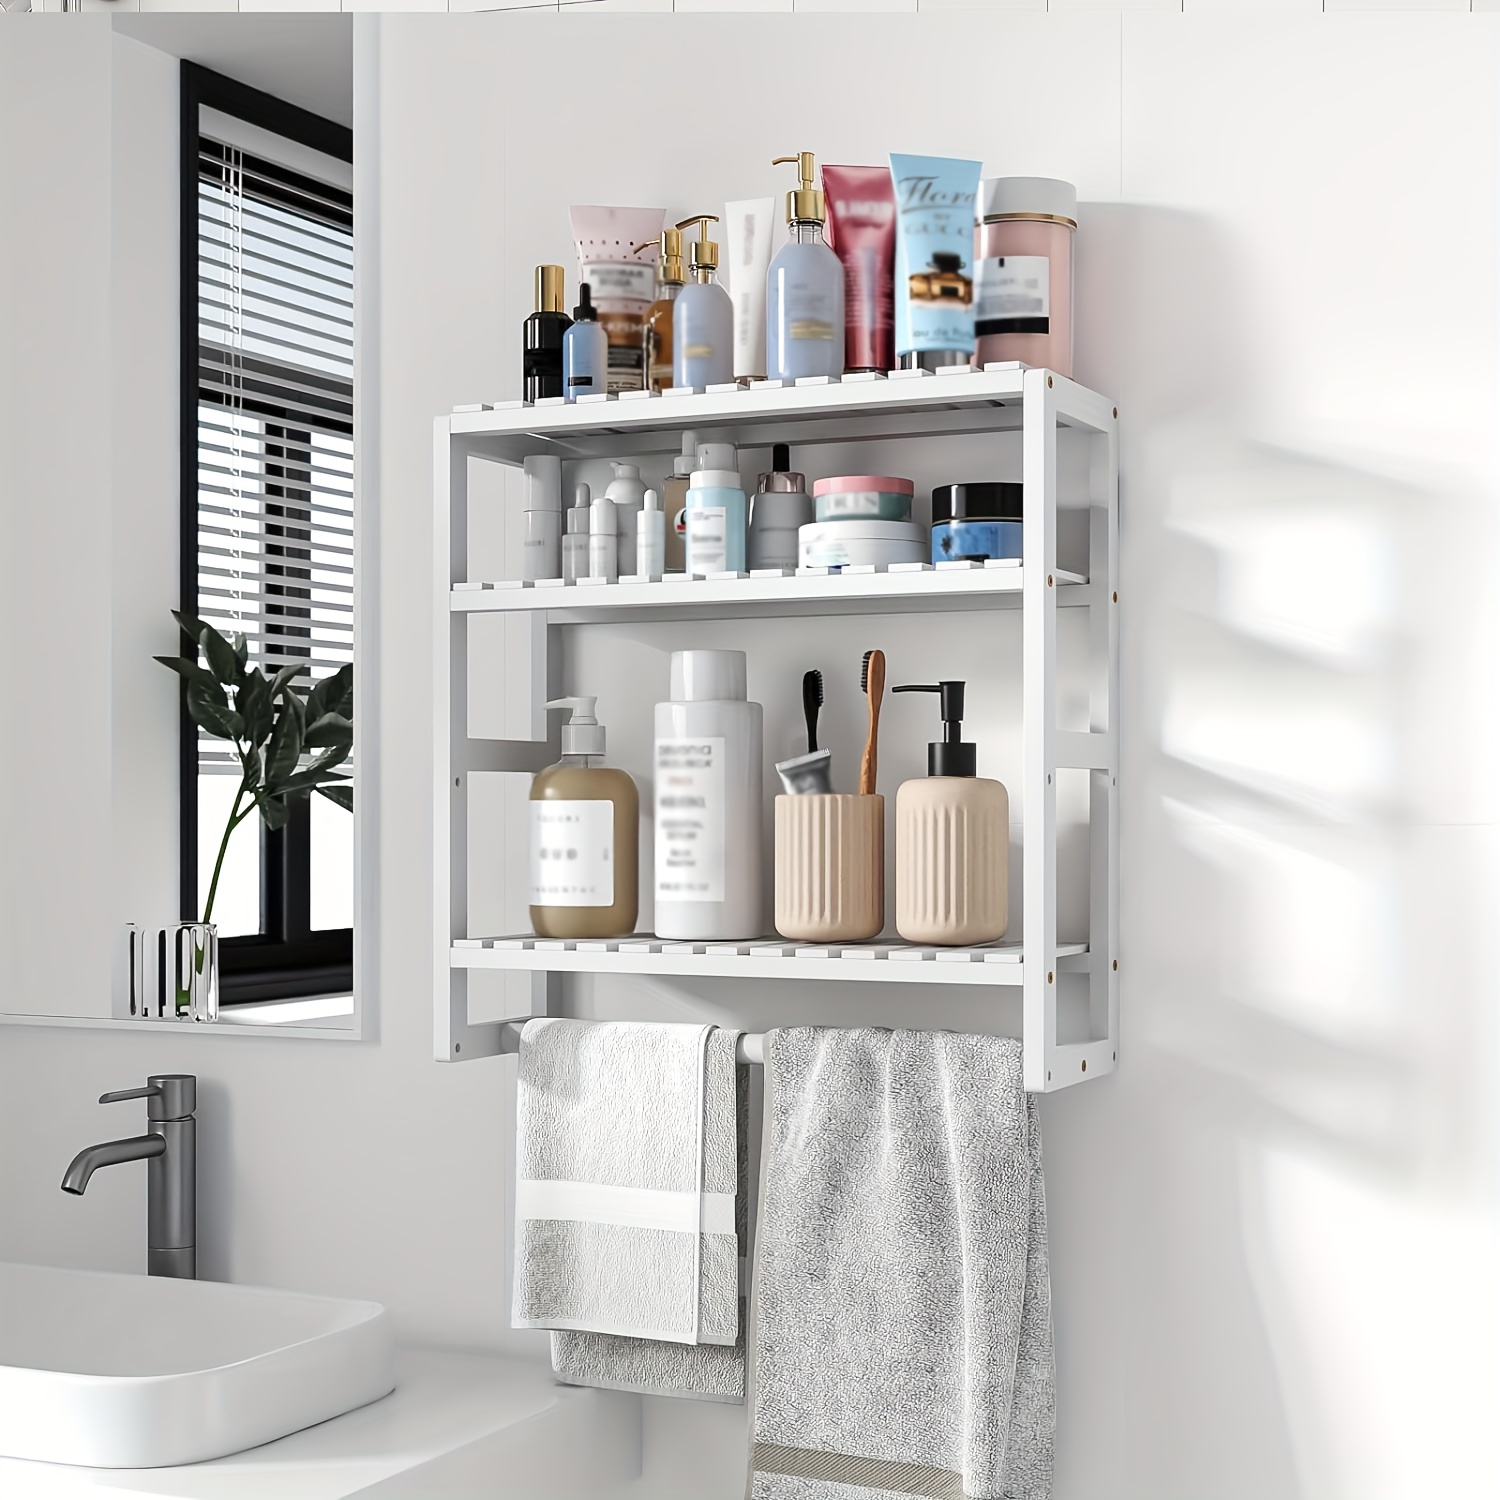 1pc bathroom storage shelves adjustable 3 tiers storage rack over the toilet storage floating shelves for wall mounted with hanging rod bathroom accessories home organization and storage supplies bathroom decor